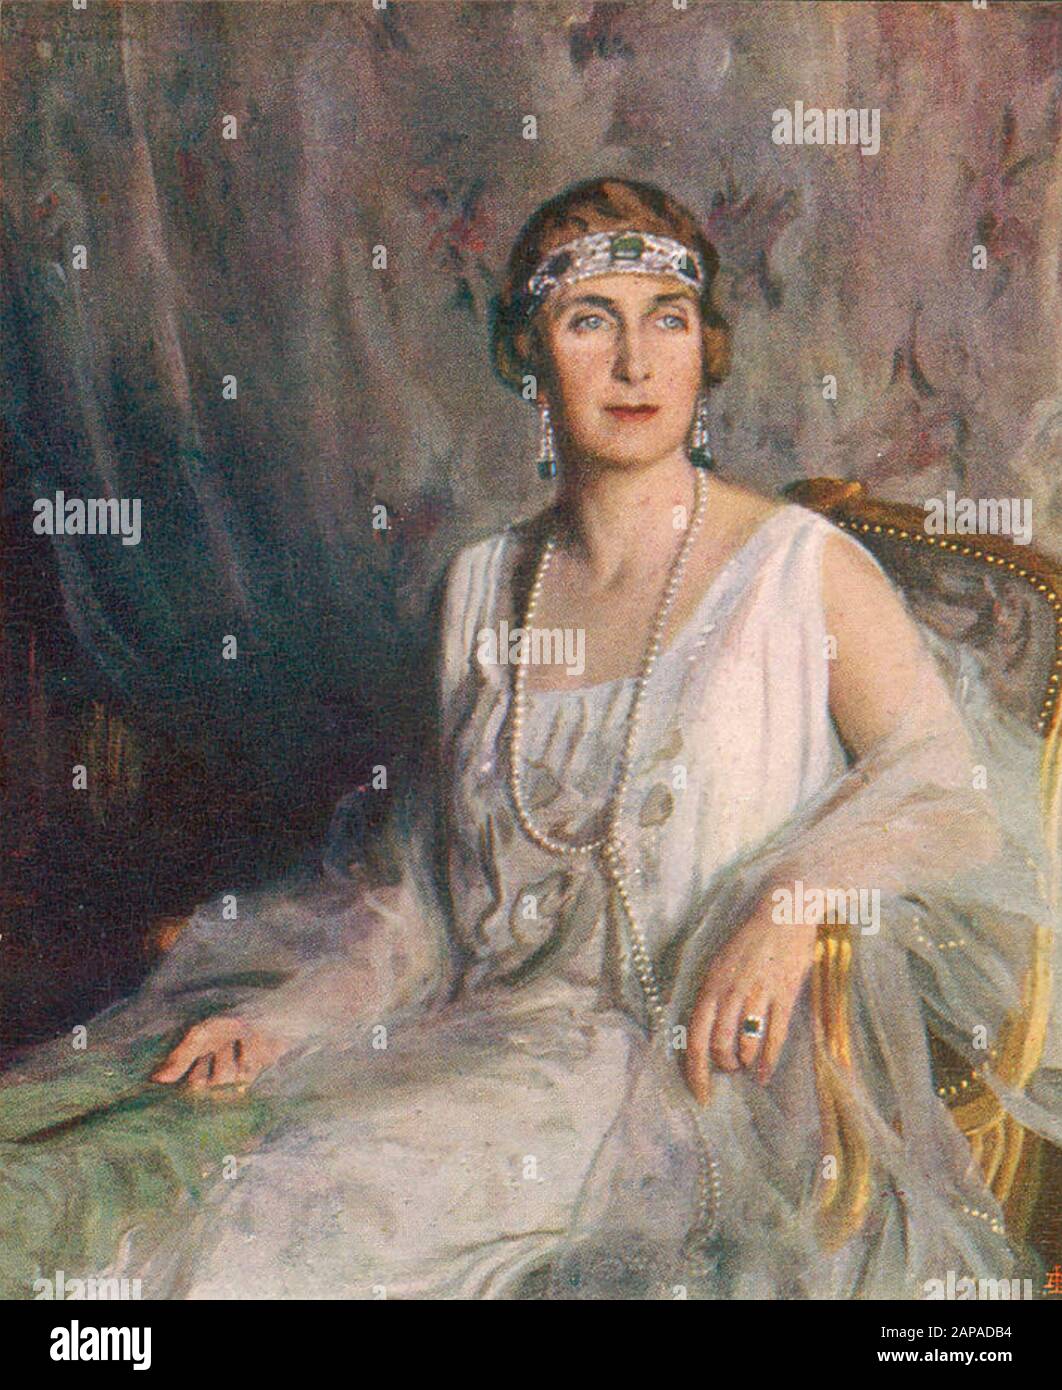 VICTORIA EUGENIE OF BATTENBERG (1887-1969) Queen of Spain as wife of Alfonso XIII. Painted by Philip de László about 1920 Stock Photo